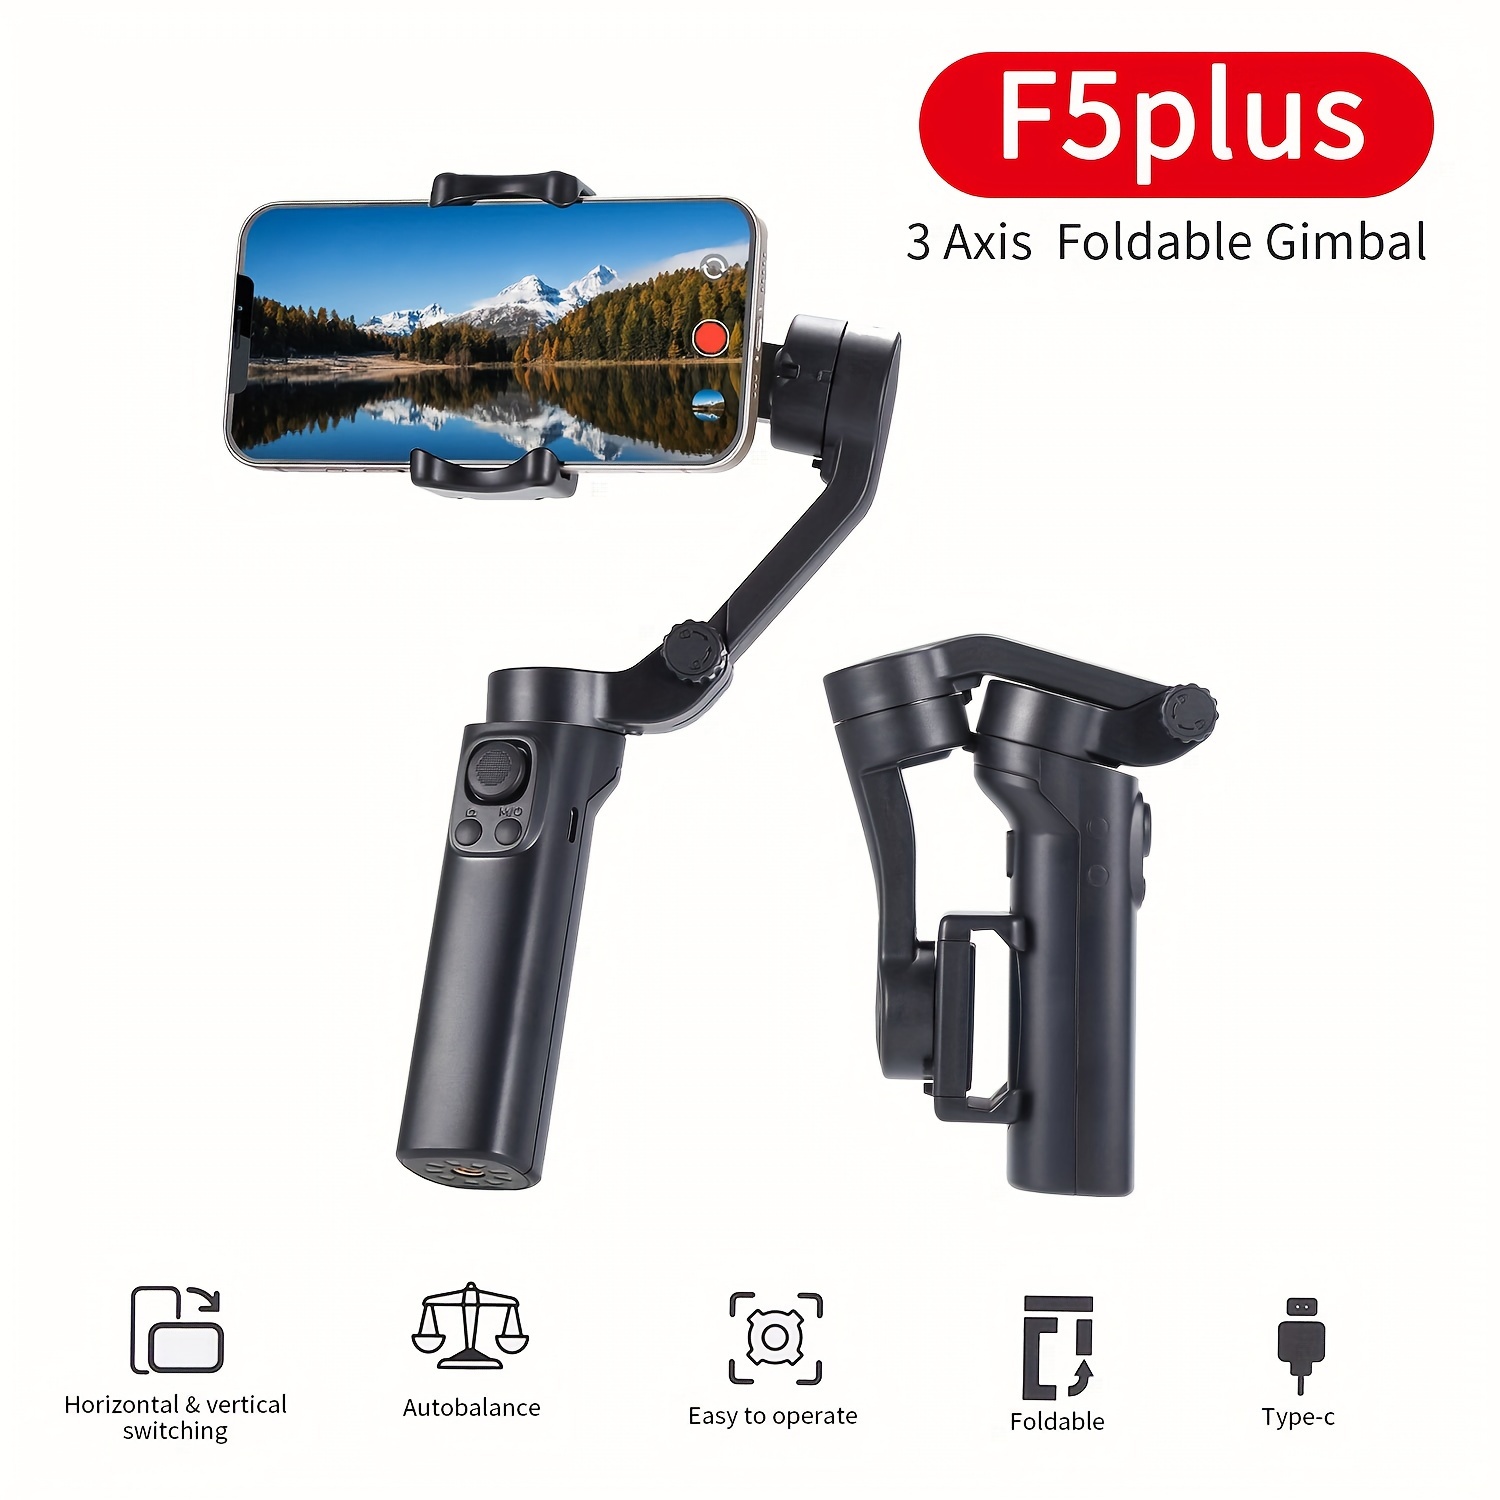 DJI Osmo Mobile 6 Gimbal Stabilizer for Smartphones, 3-Axis Phone Gimbal,  Built-In Extension Rod, Object Tracking, Portable and Foldable, Vlogging